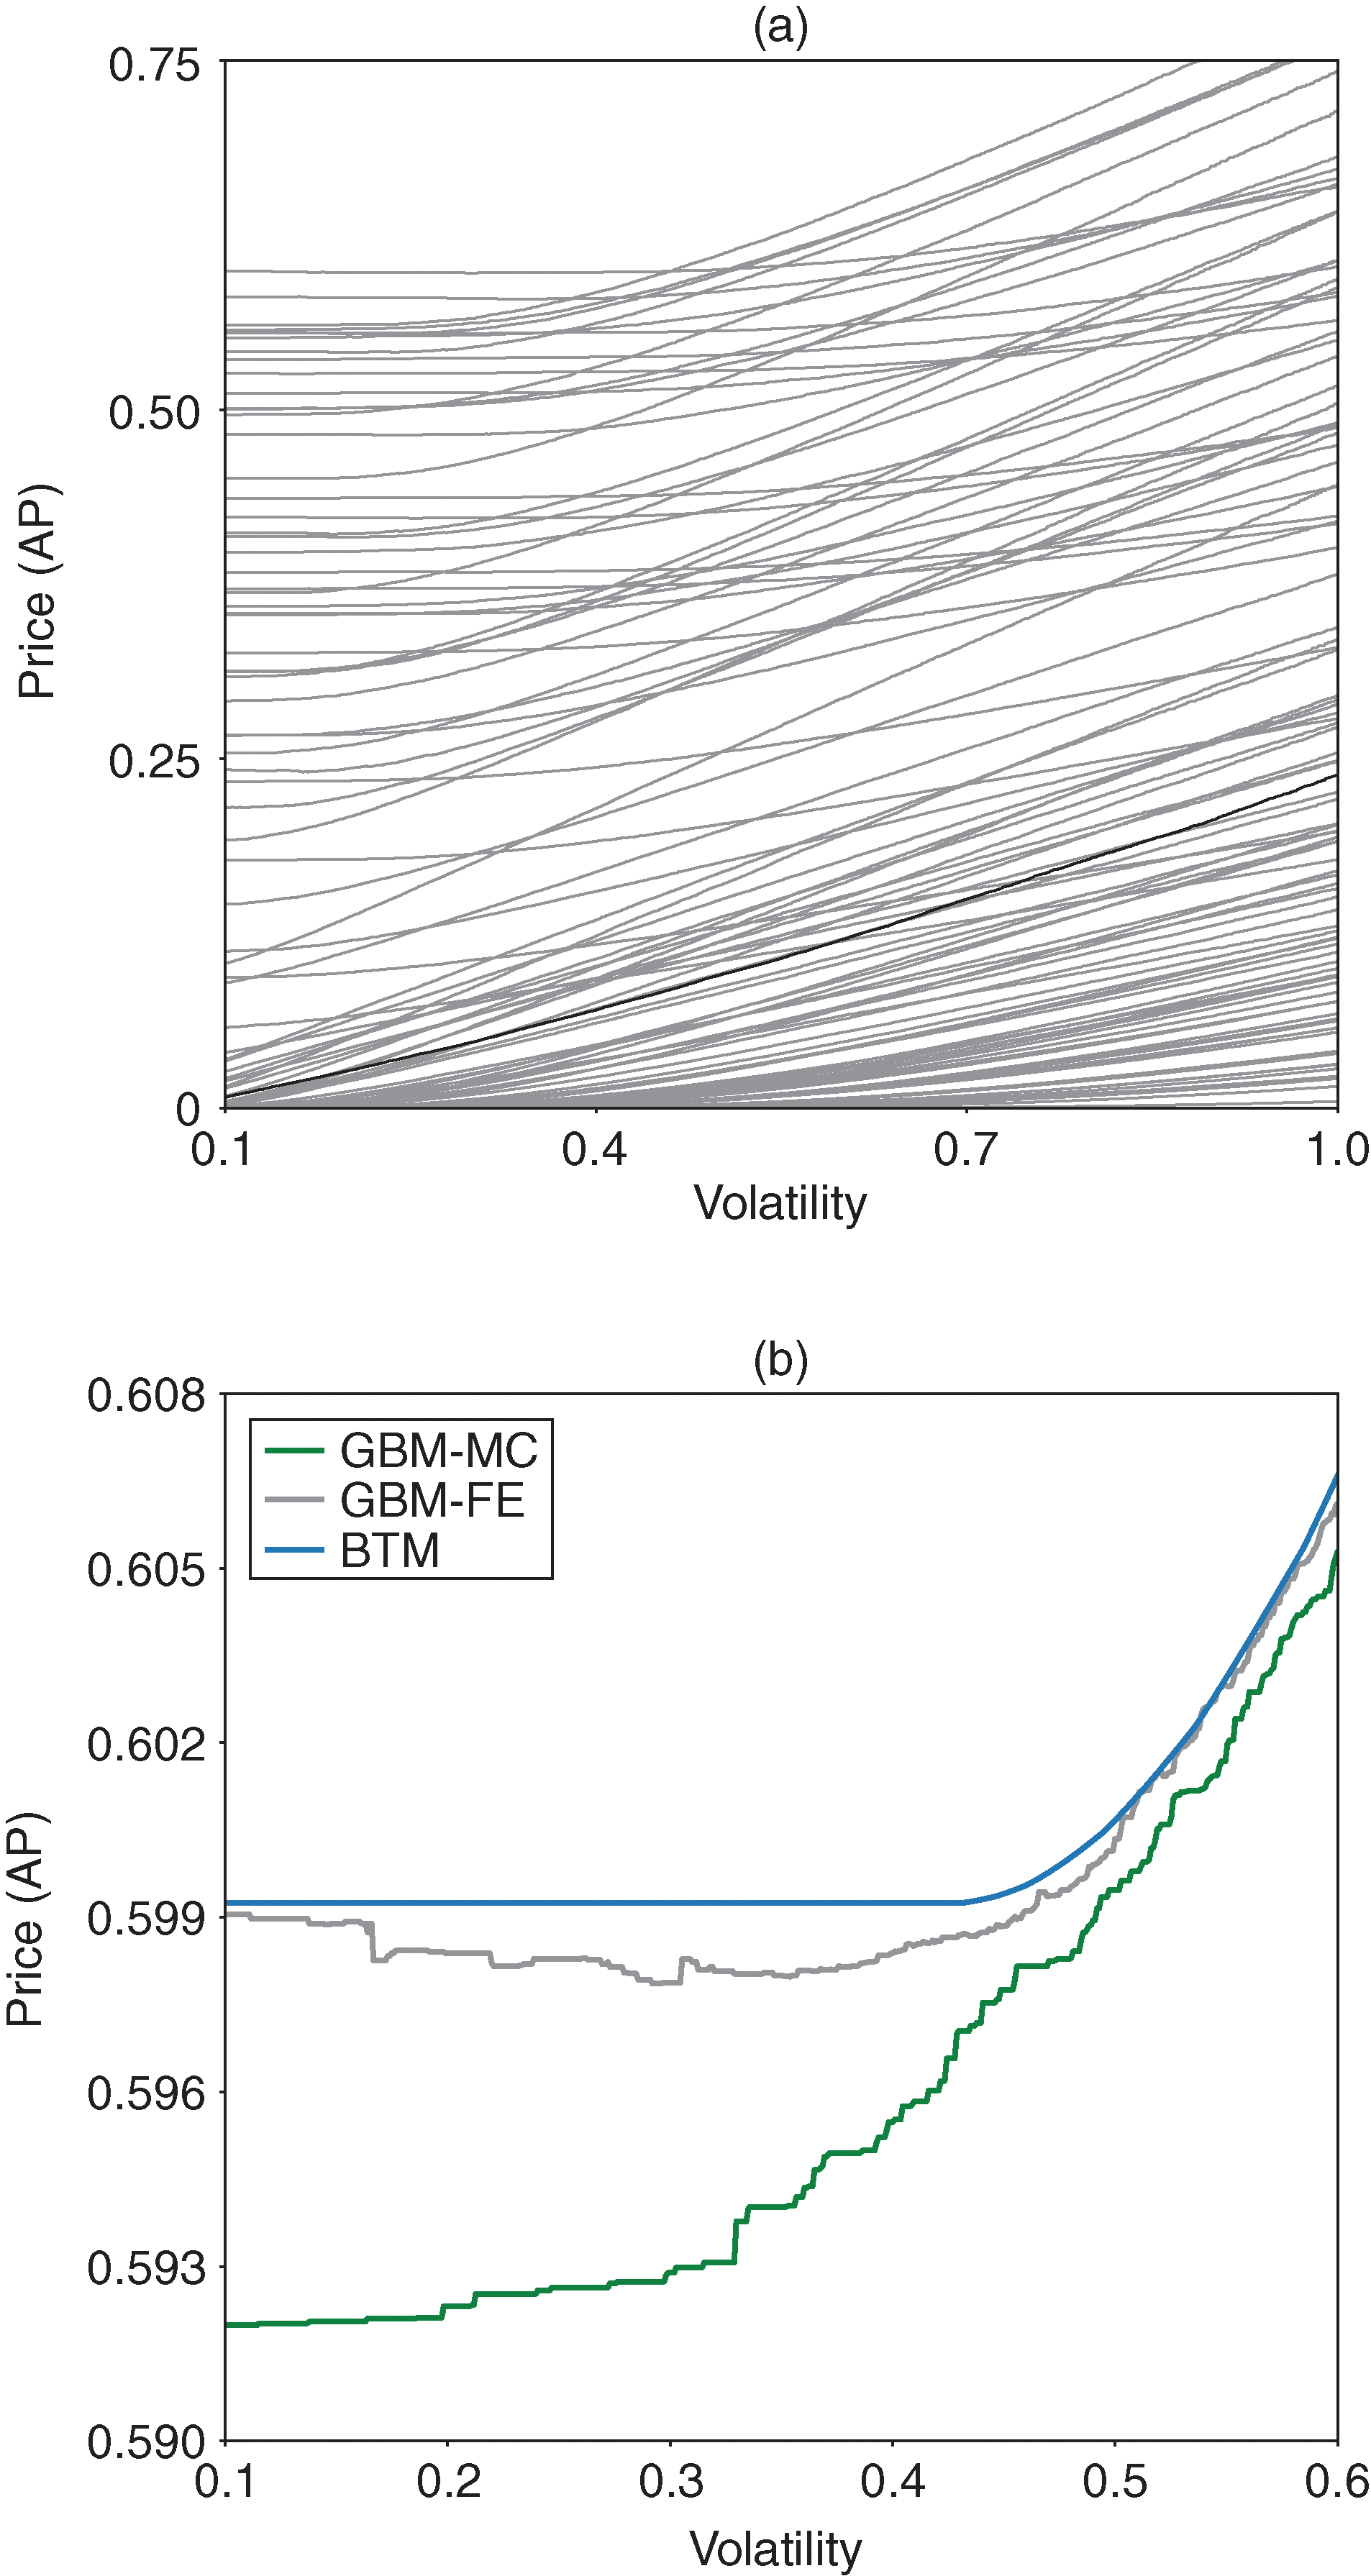 ICE curves (gray) and partial dependence plot (black) for the GBM model including feature engineering predicting prices of American put options. The ICE curve (in green) originates from the model with monotonic constraints. (a) ICE and partial dependence curves. (b) ICE curves in detail.